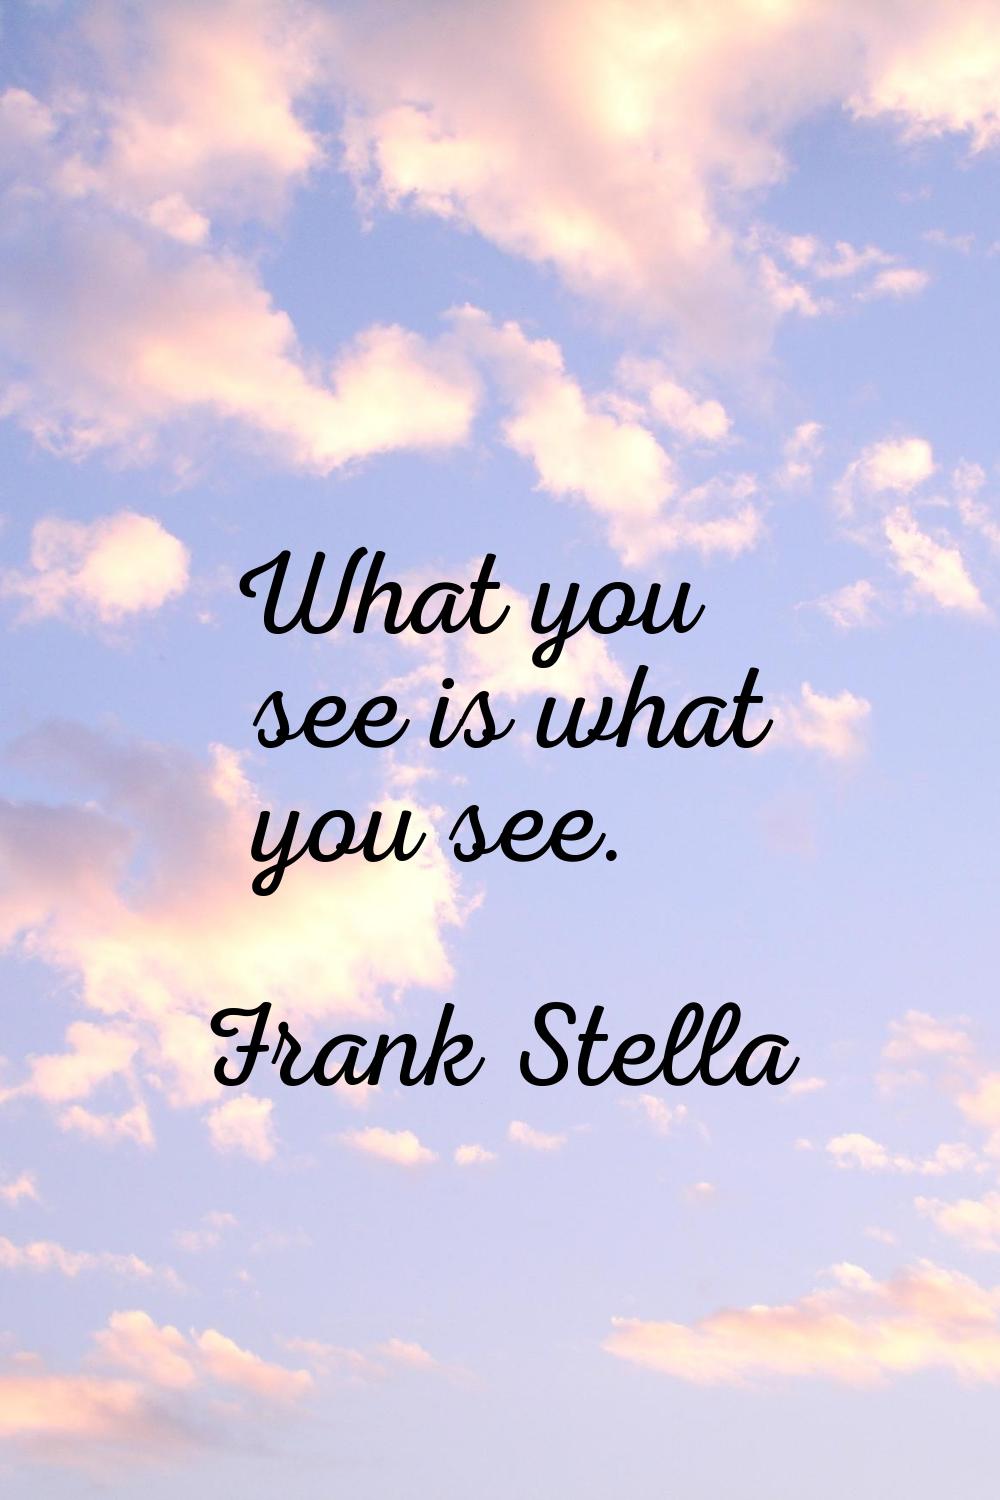 What you see is what you see.